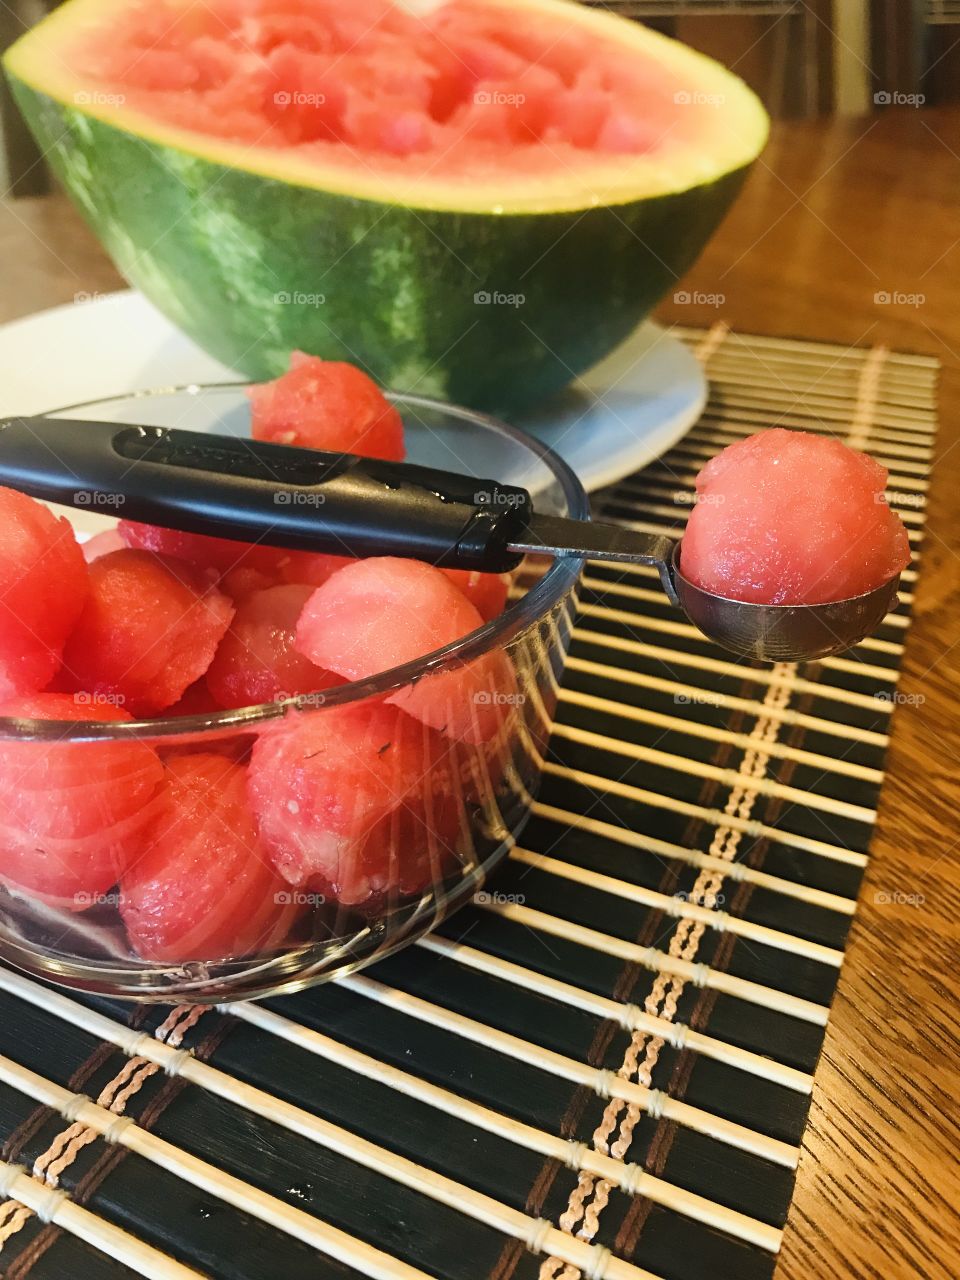 Super fun way we like eating juicy watermelon...making our bites into delicious watermelon balls! 